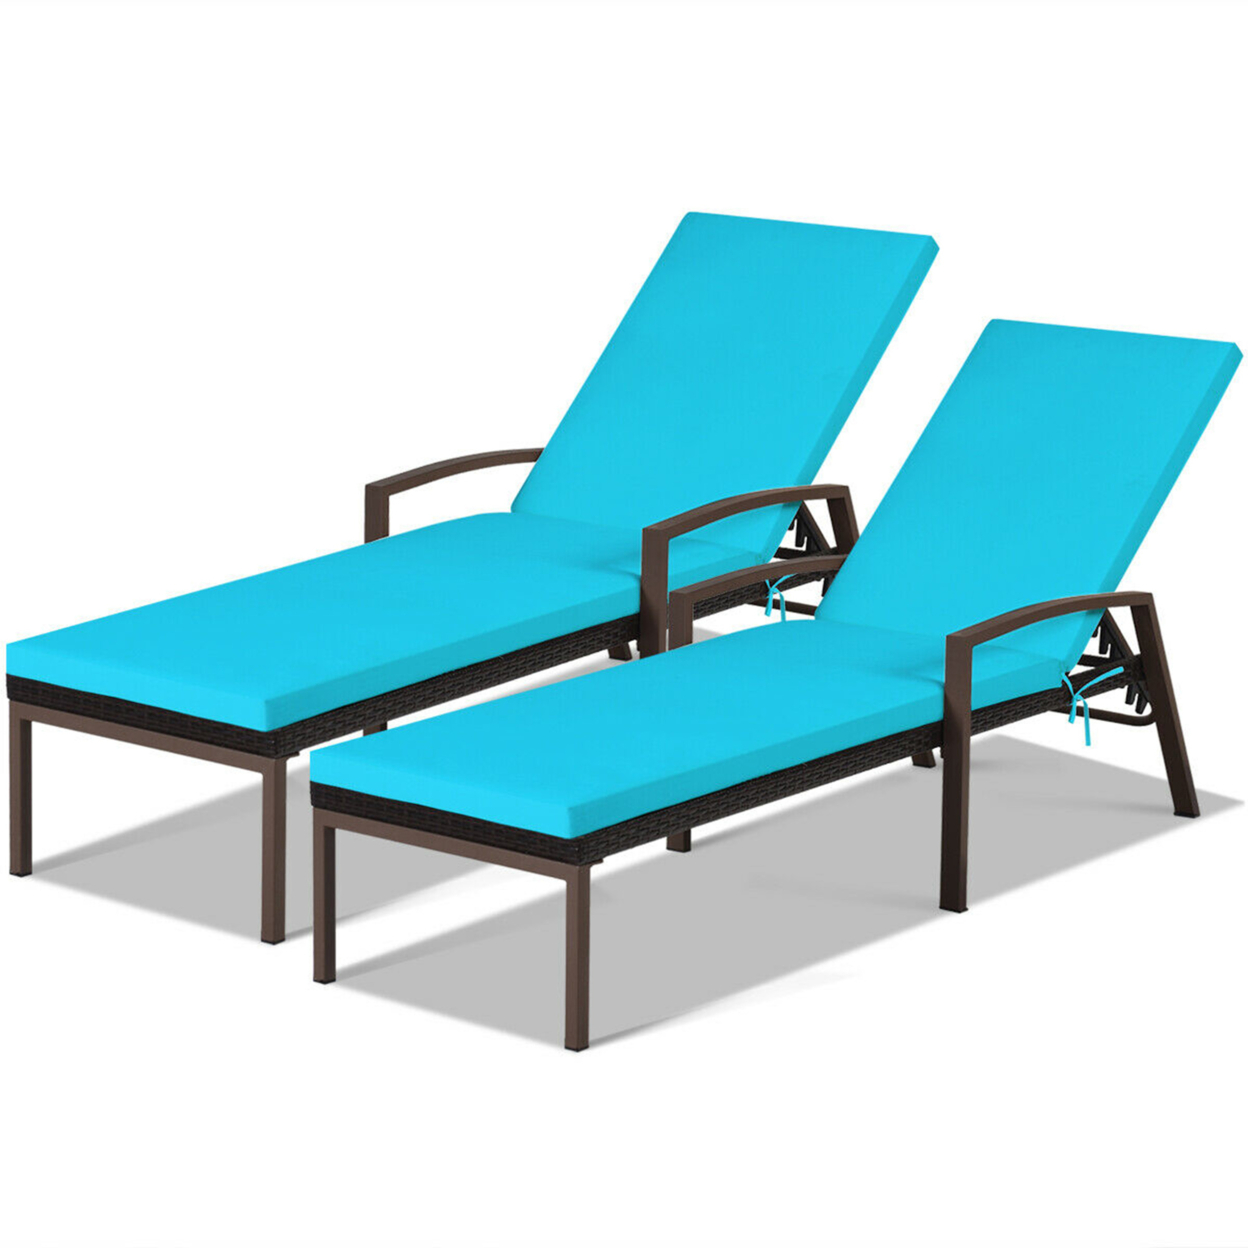 2PCS Adjustable Patio Rattan Chaise Recliner Lounge Chair W/ Turquoise Cushion